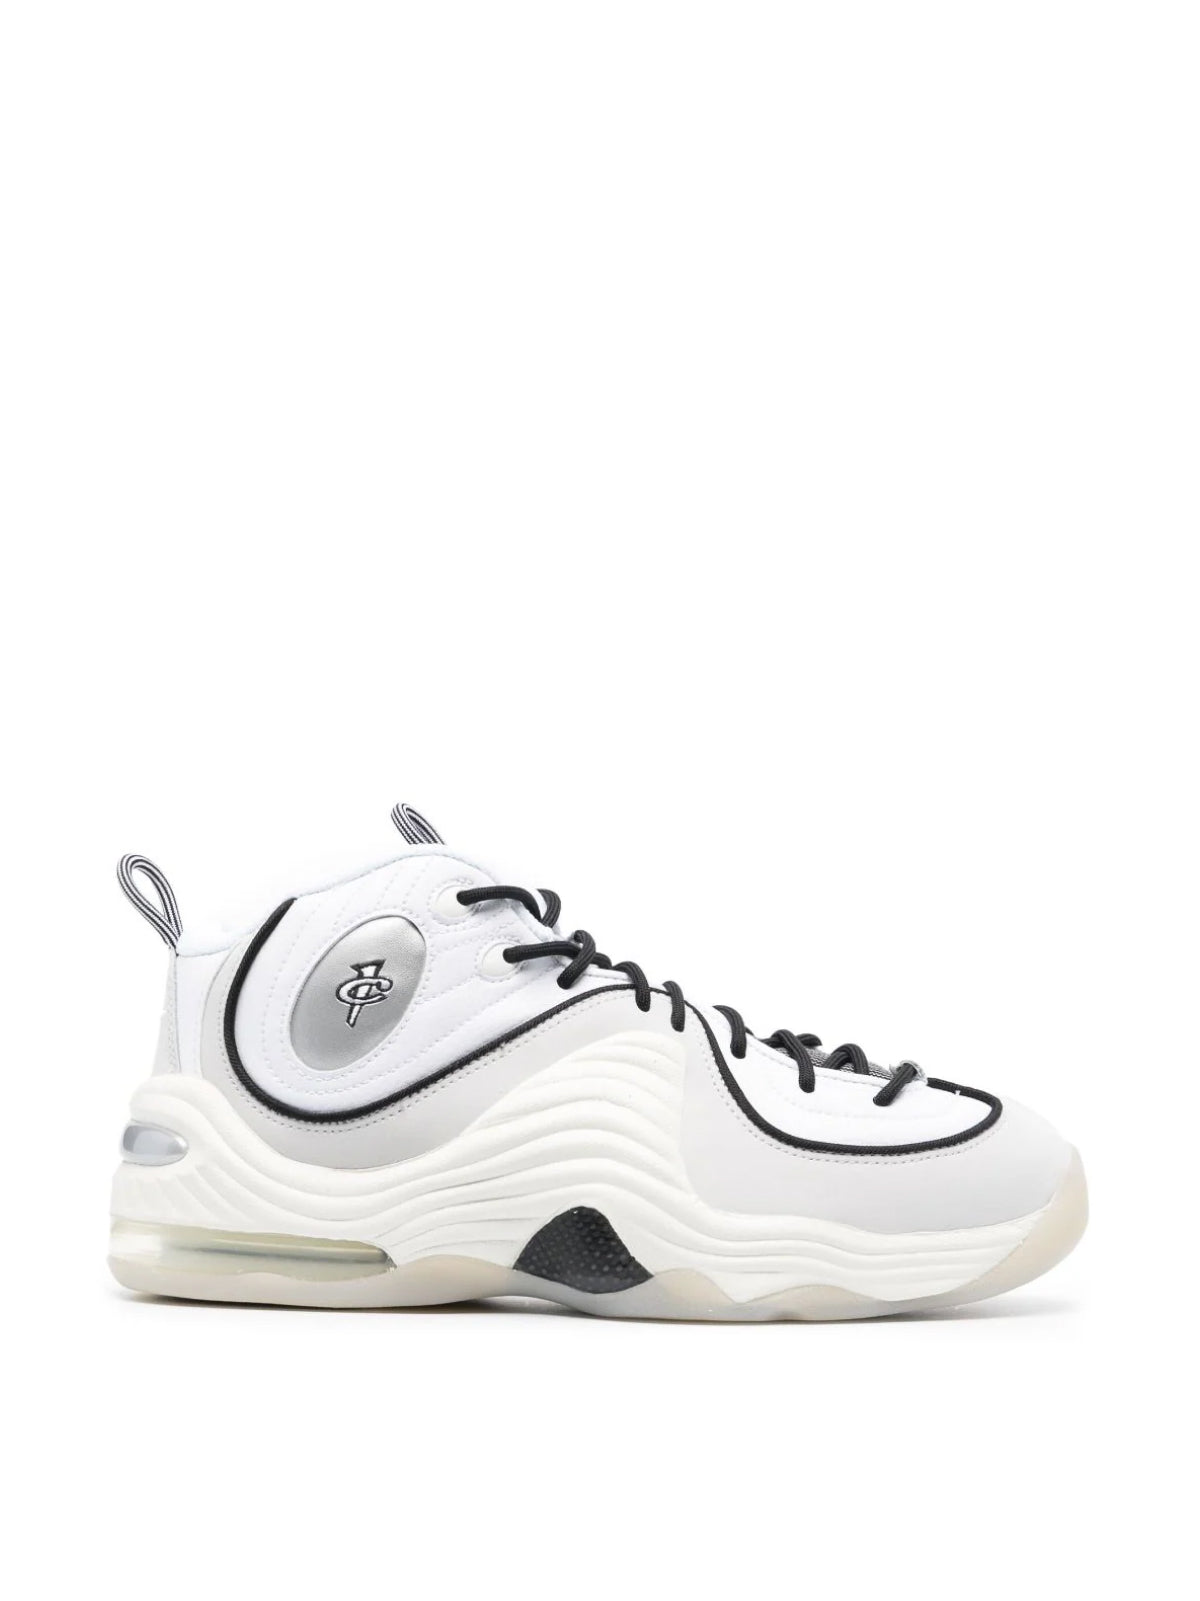 Nike-OUTLET-SALE-Air Penny II Sneakers-ARCHIVIST